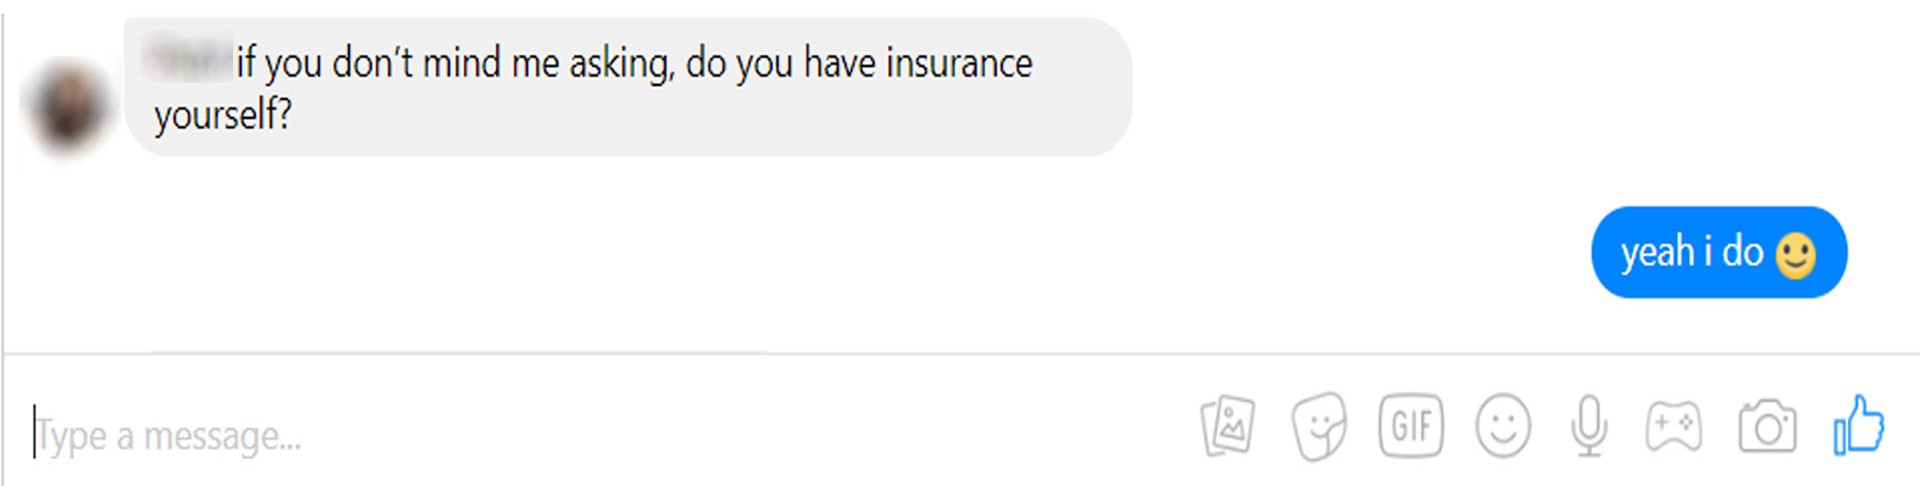 Even if it means to lie by saying you already have insurance. Screengrab from Facebook 